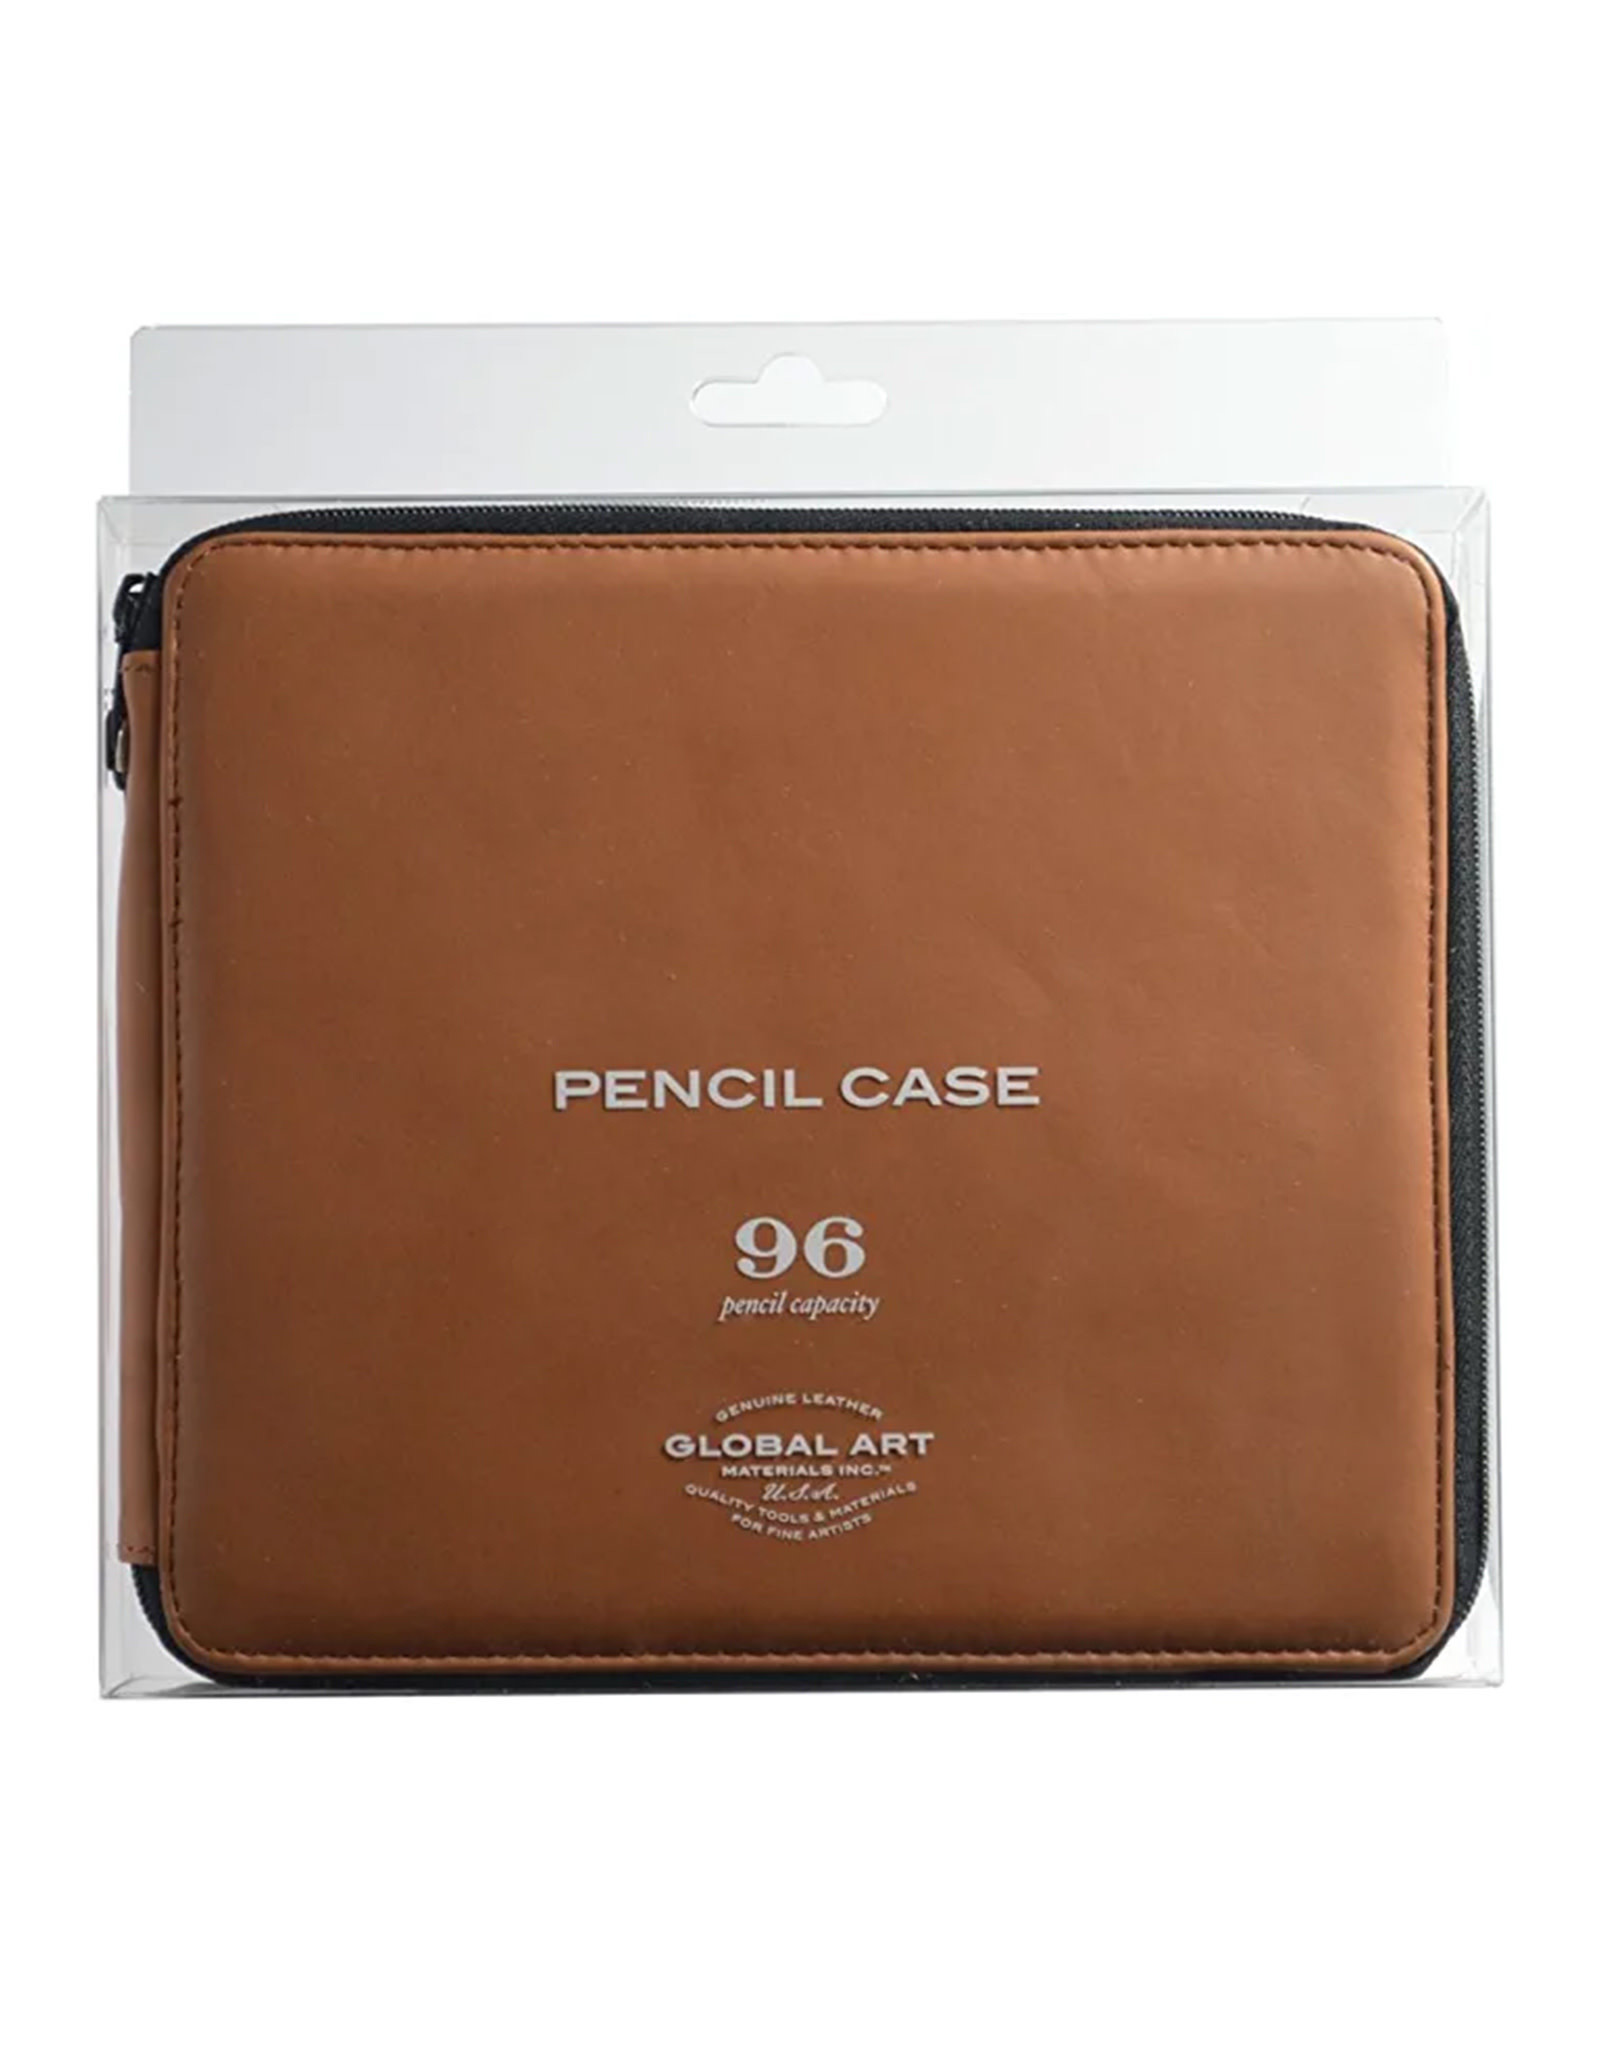 Global Art Pencil Case, Genuine Leather, Brown, 96 Pencils - The Art  Store/Commercial Art Supply